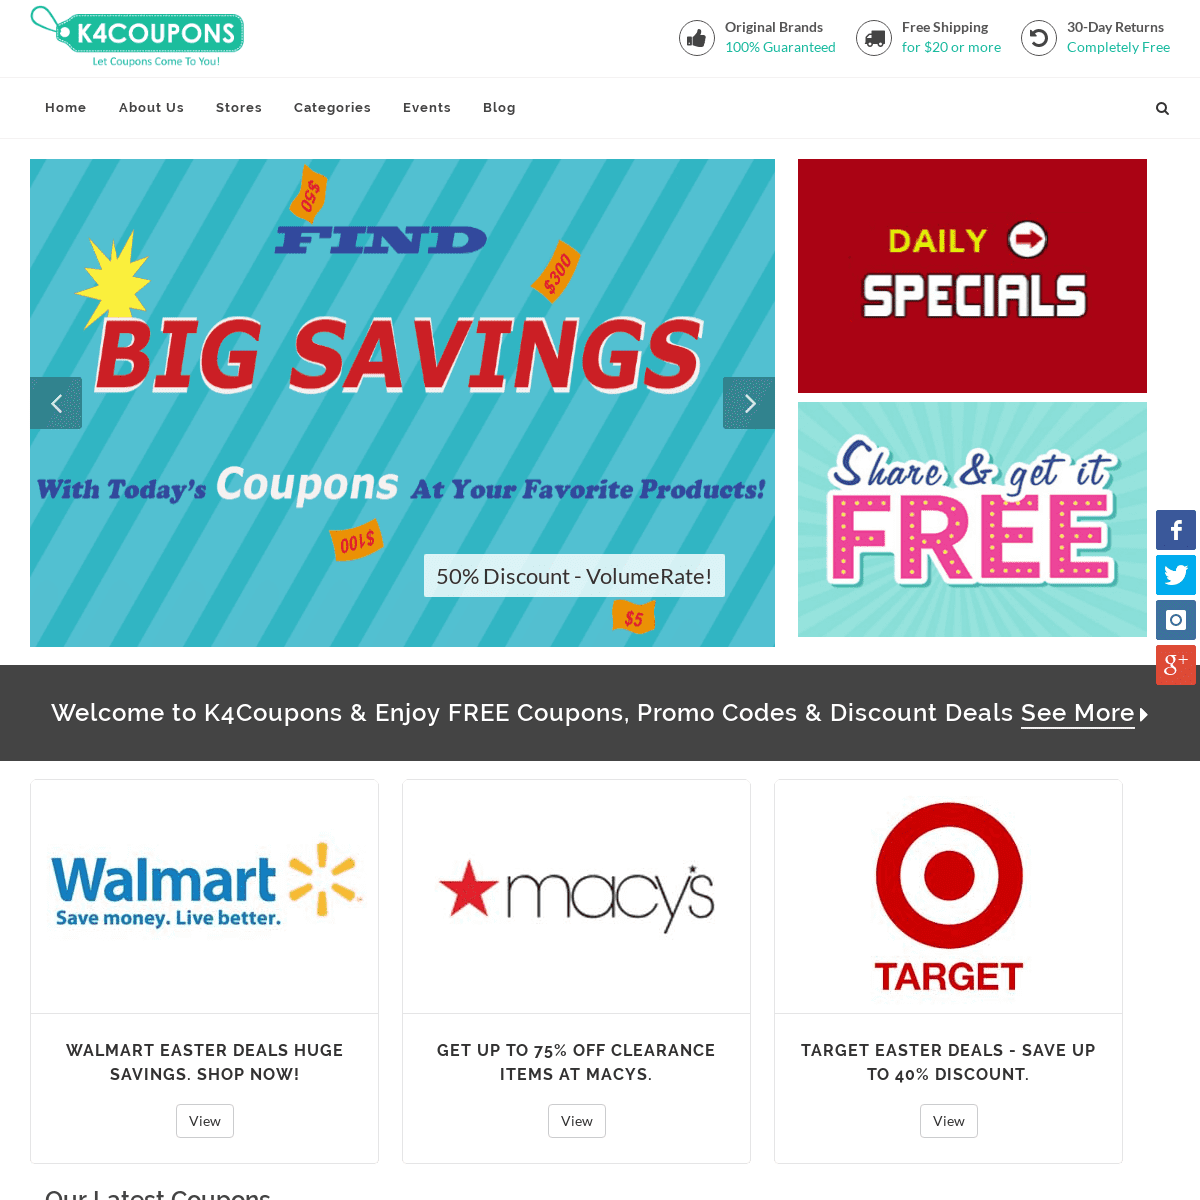 A complete backup of k4coupons.com